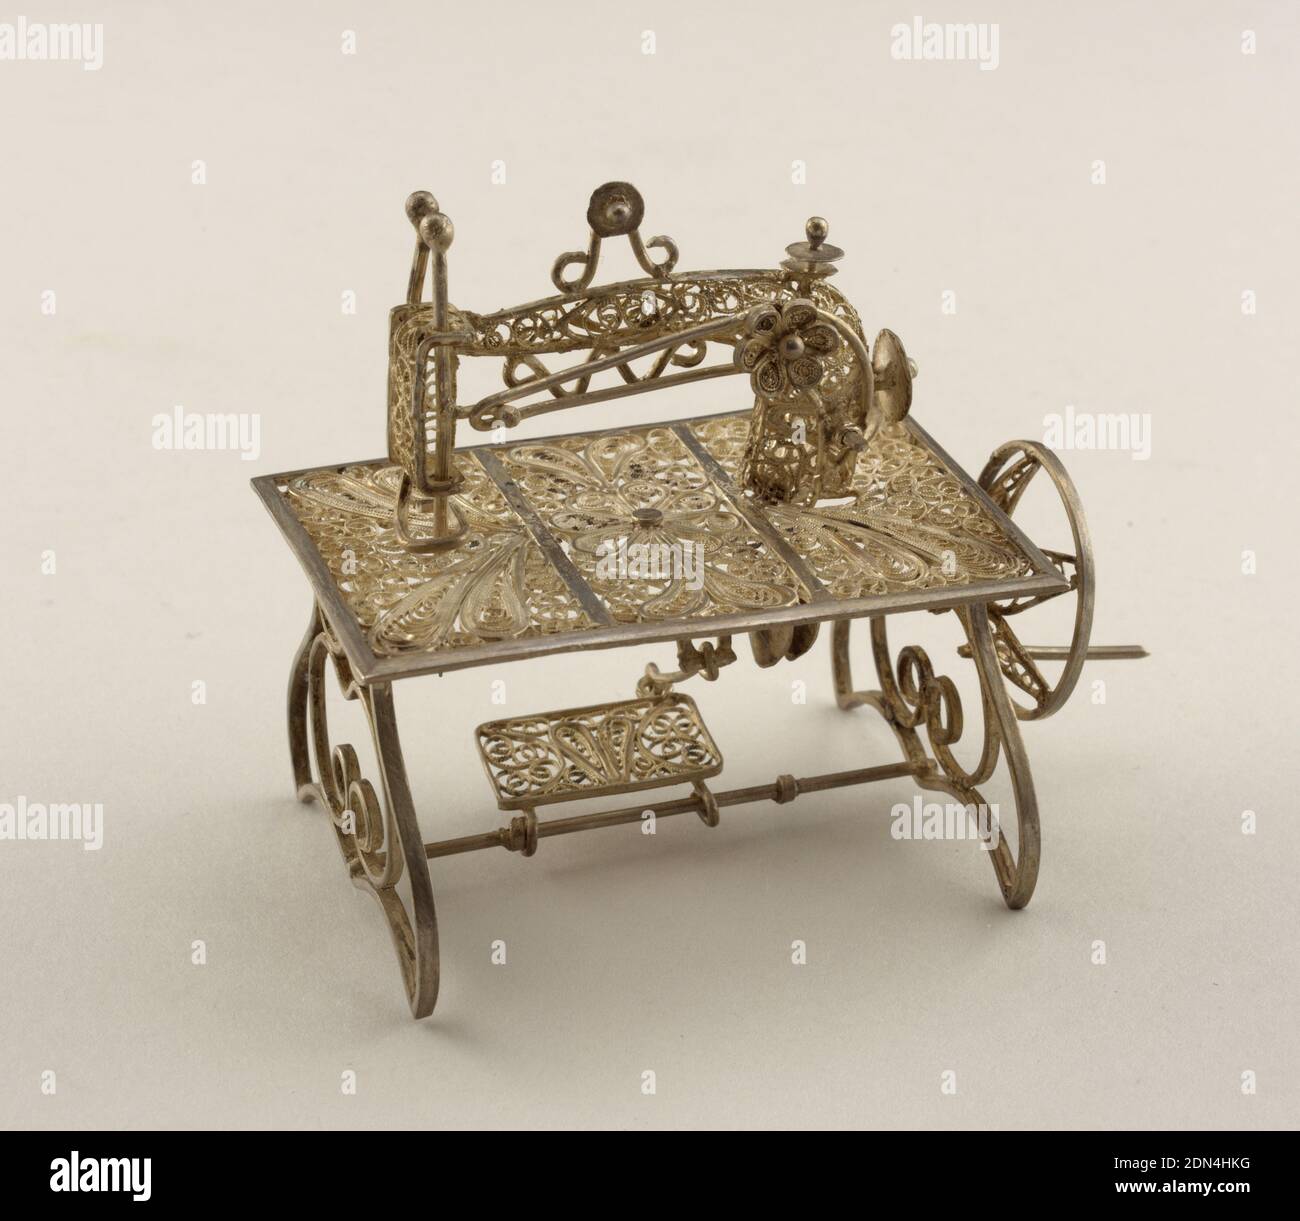 Sewing machine, Silver, Filigree miniature comprising sewing machine form on rectangular table top with decoration in three panels, on scrolled supports. The working parts consist of a treadle, crank, slotted arm, and needle., Italy, mid-19th century, miniatures, Decorative Arts, Miniature, Miniature Stock Photo